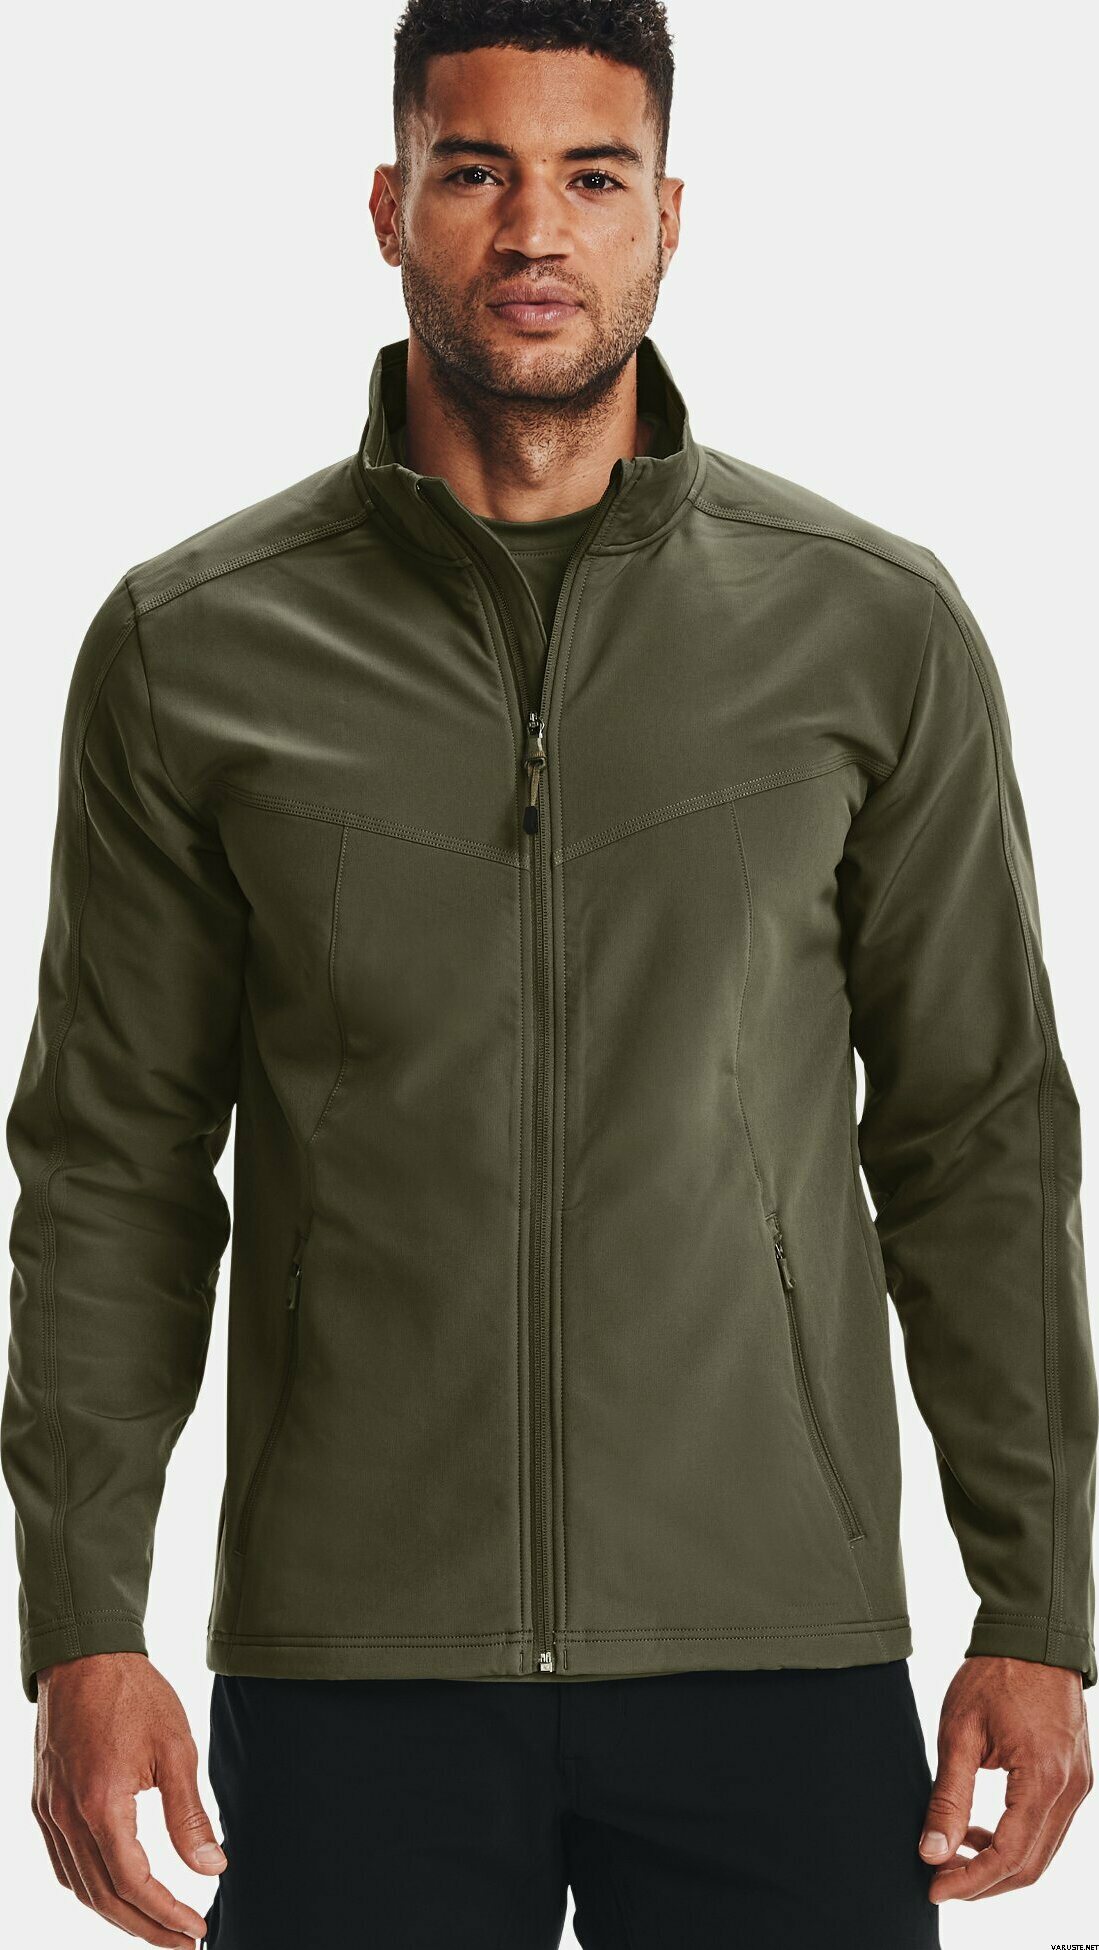 Under Armour Tactical Tac All Season Jacket | Military Soft Shell ...